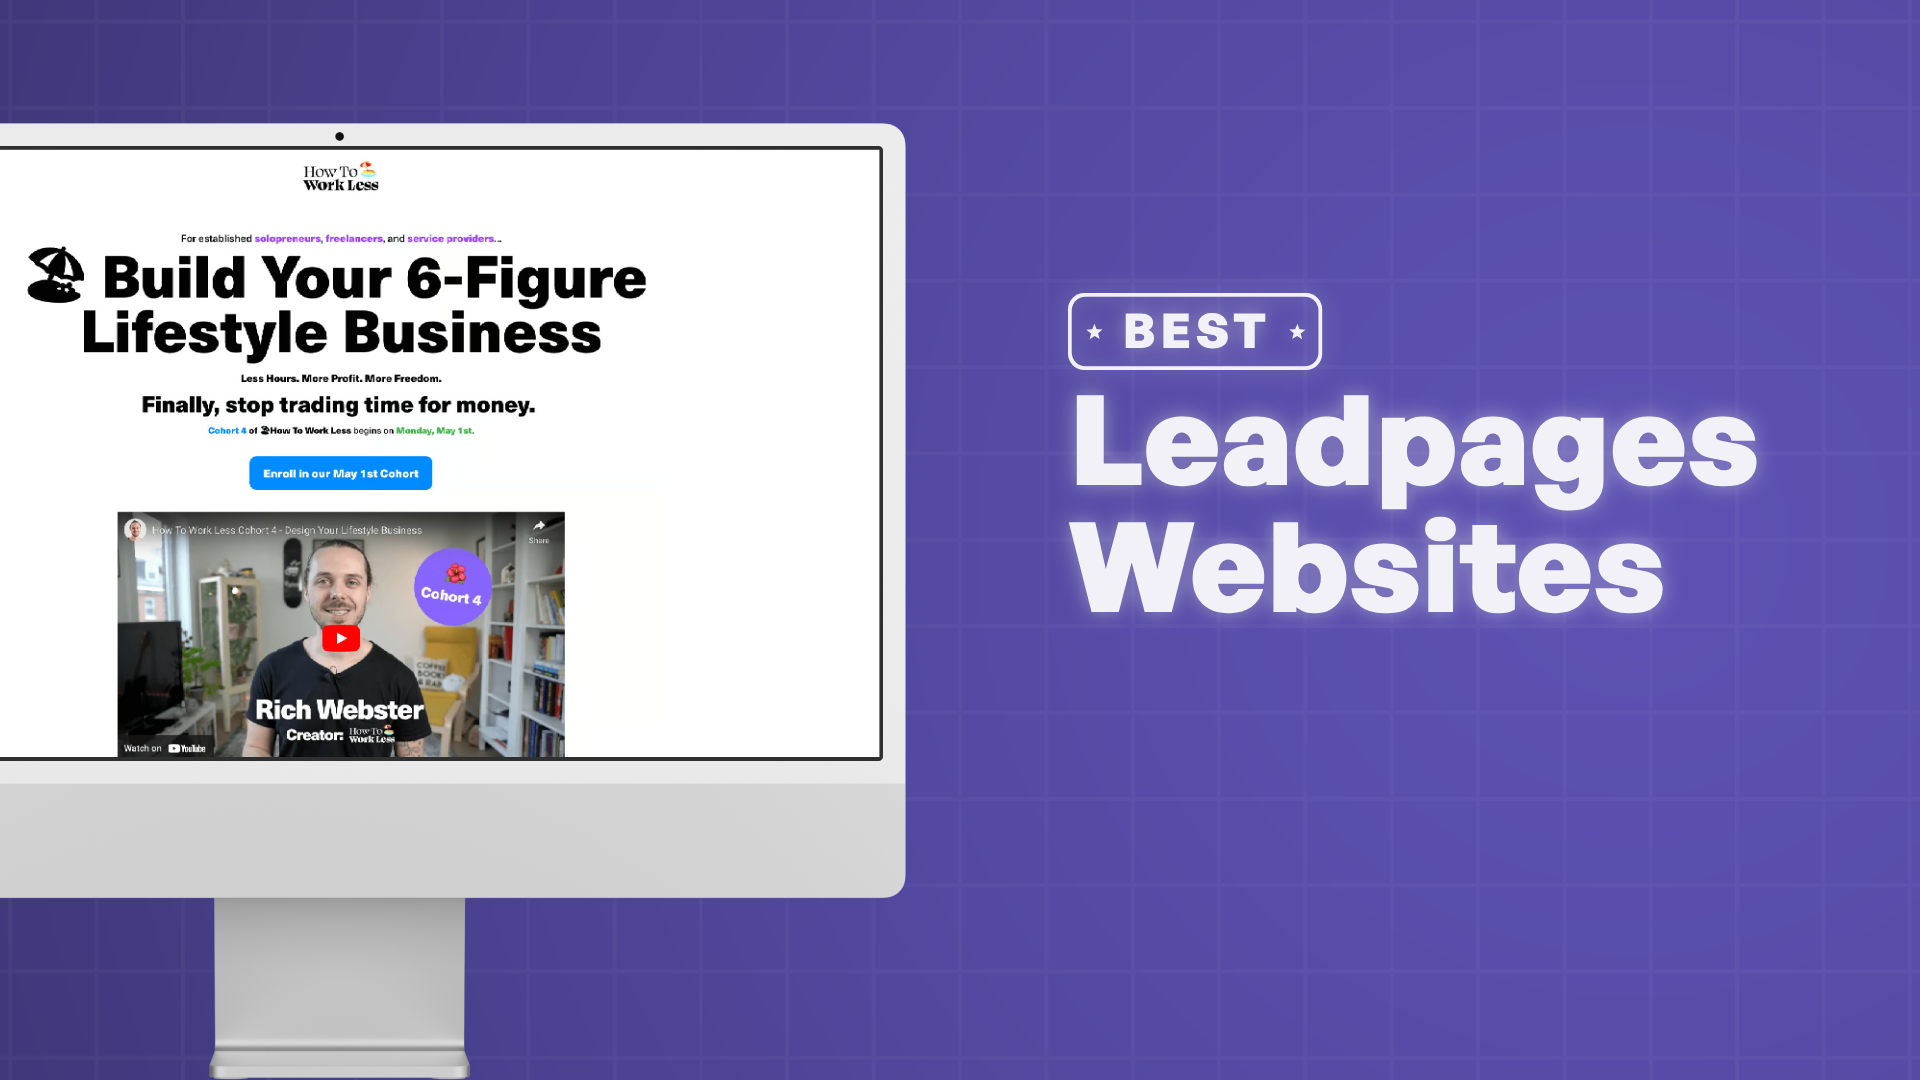 "Best Websites on Leadpages" with screenshots of the websites on Leadpages